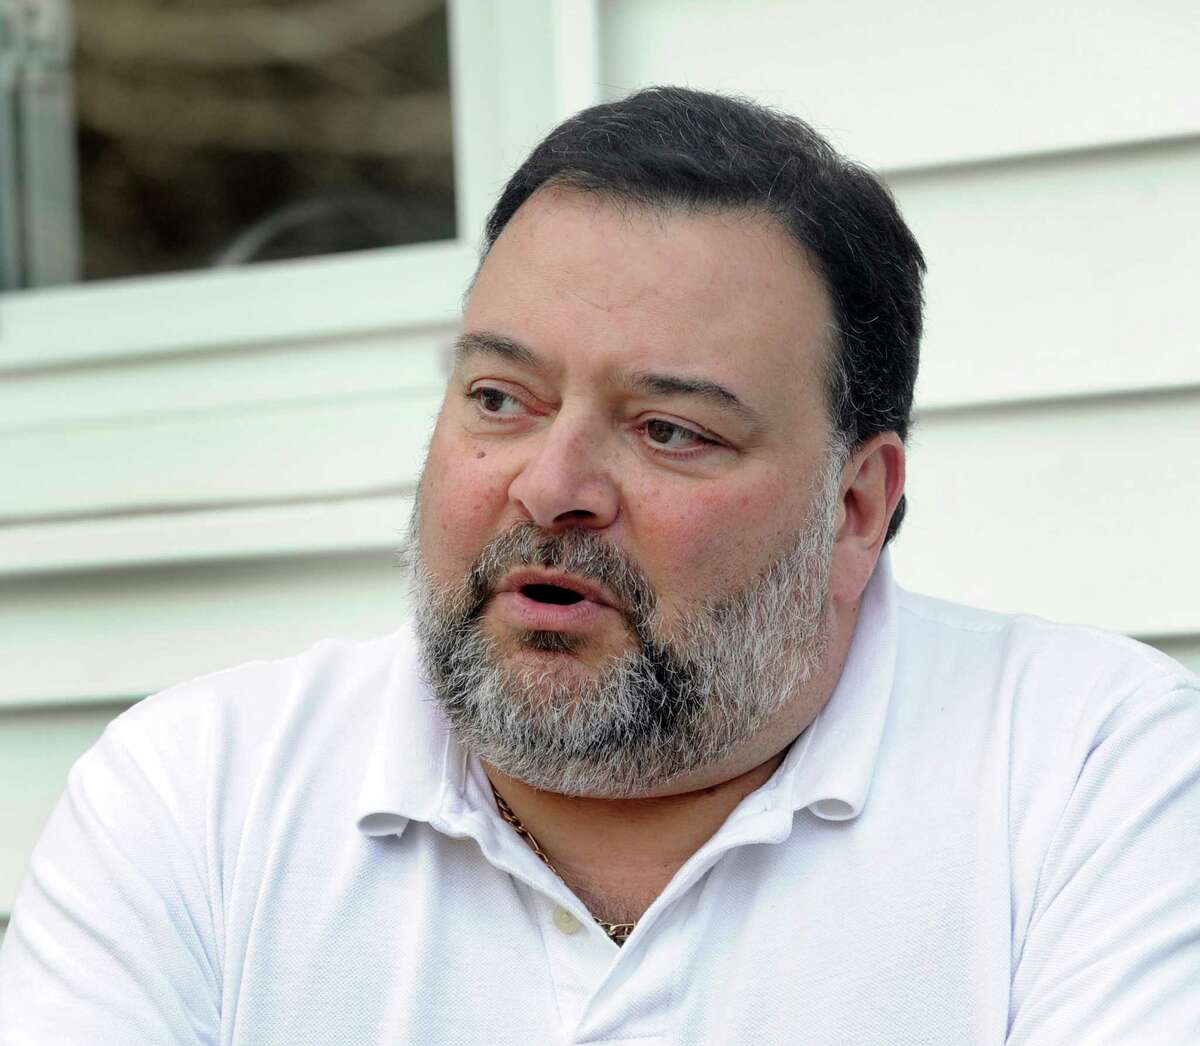 Rob Gianazza, chairman of A Brookfield Party, is photographed at his Brookfield, Conn. home, Wednesday, April 29, 2015.